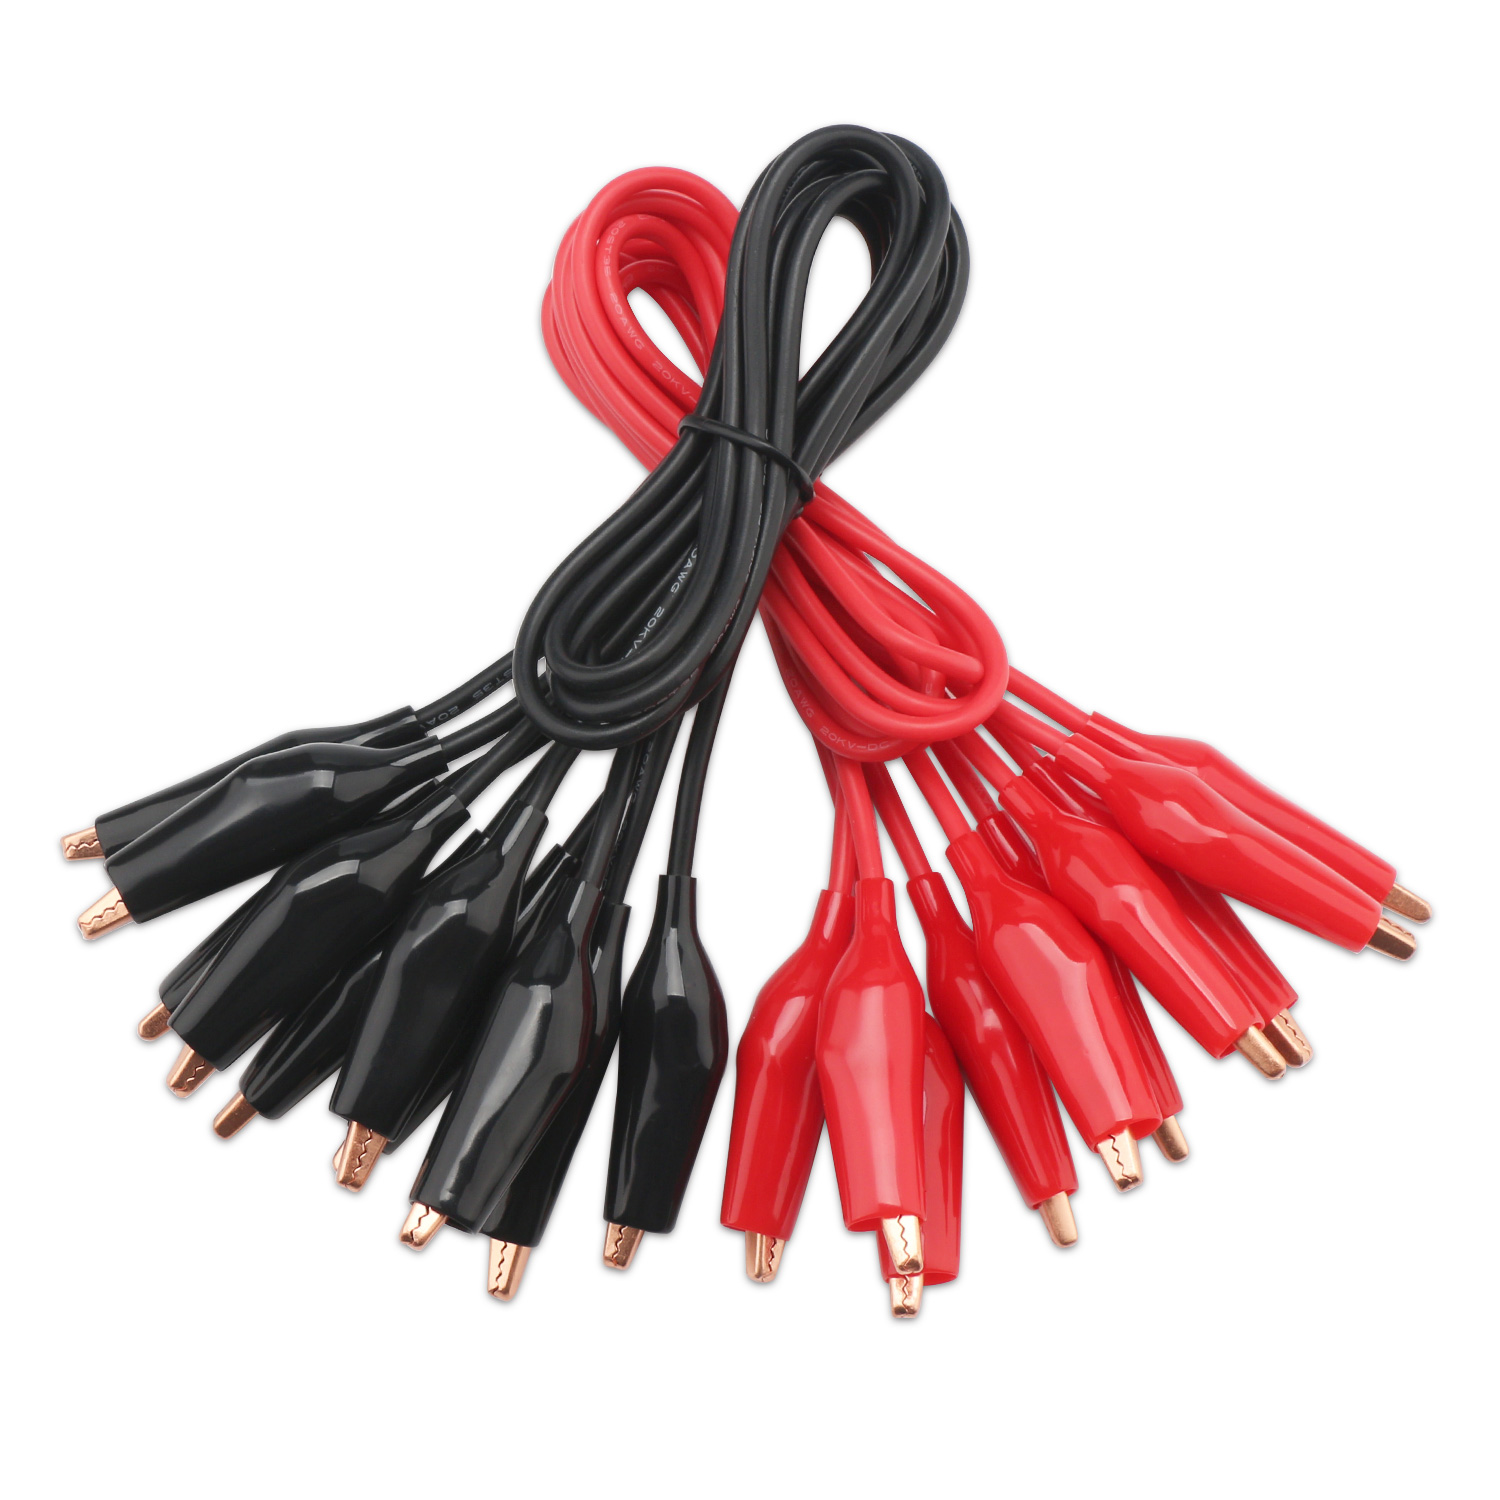 63D9 10pcs Double Ended Test Leads Alligator Electronic Clip Jumper Wire Cord